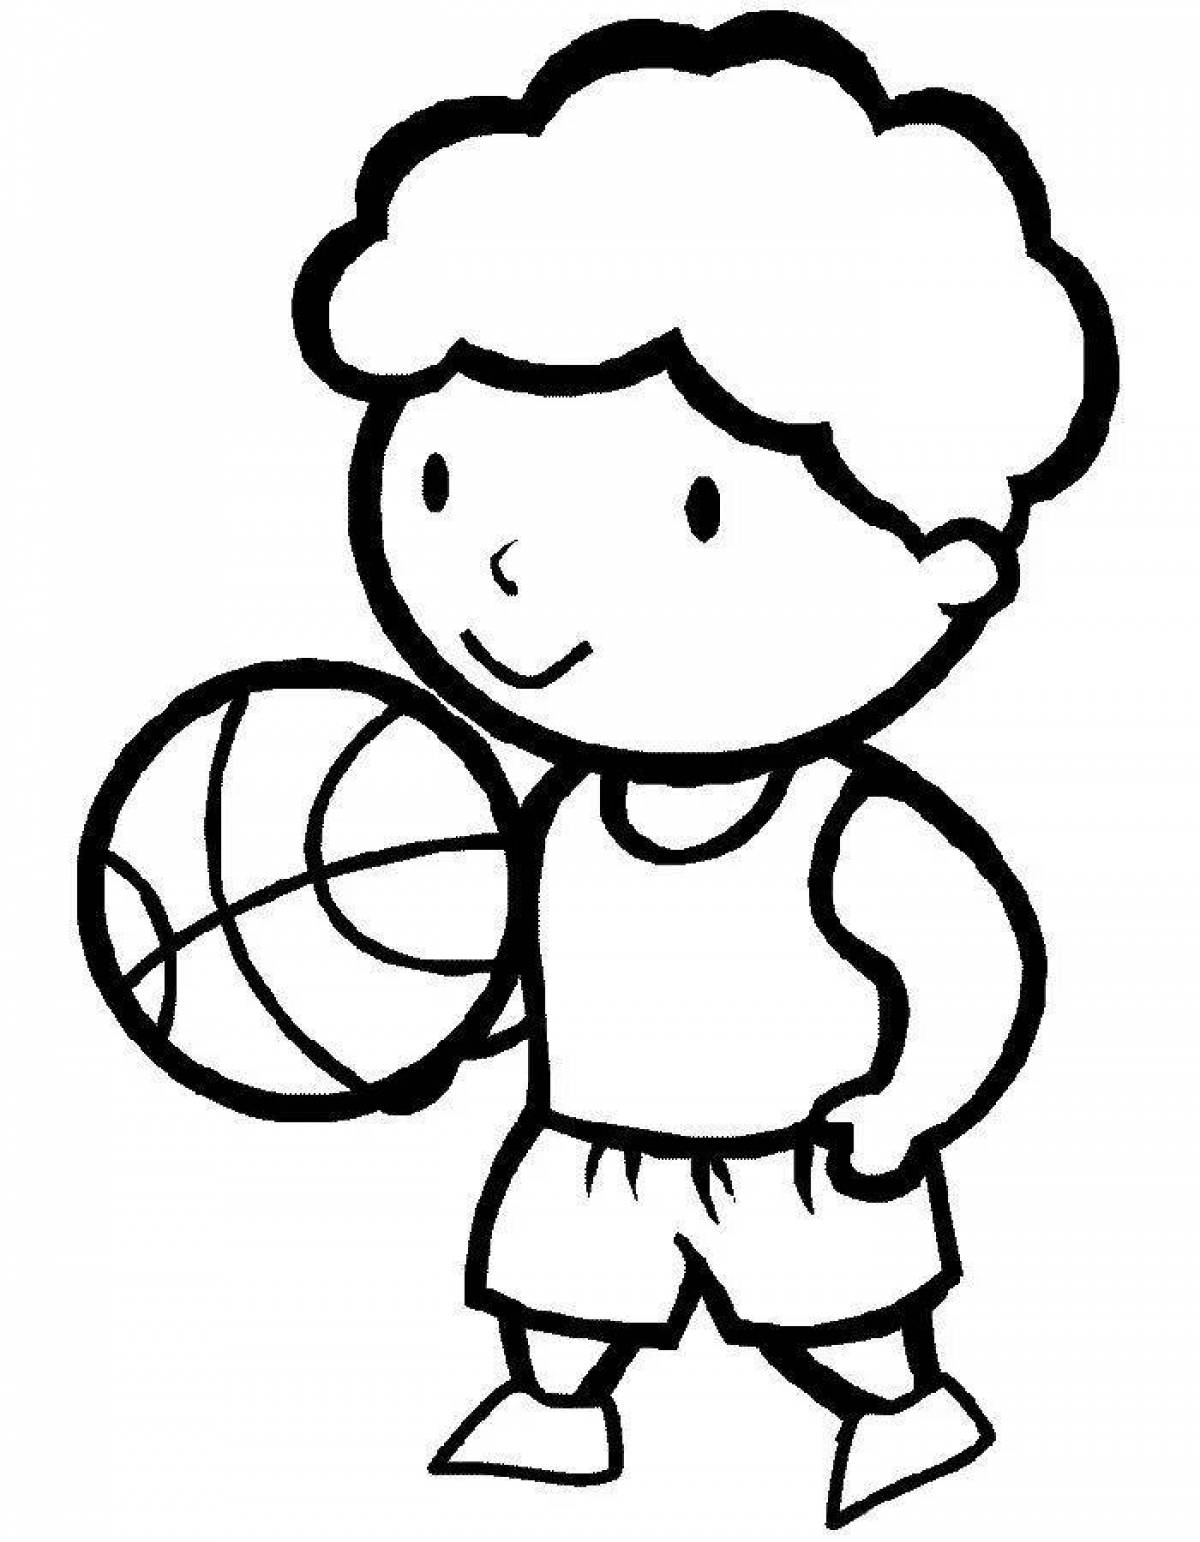 Rampant coloring pages of athletes